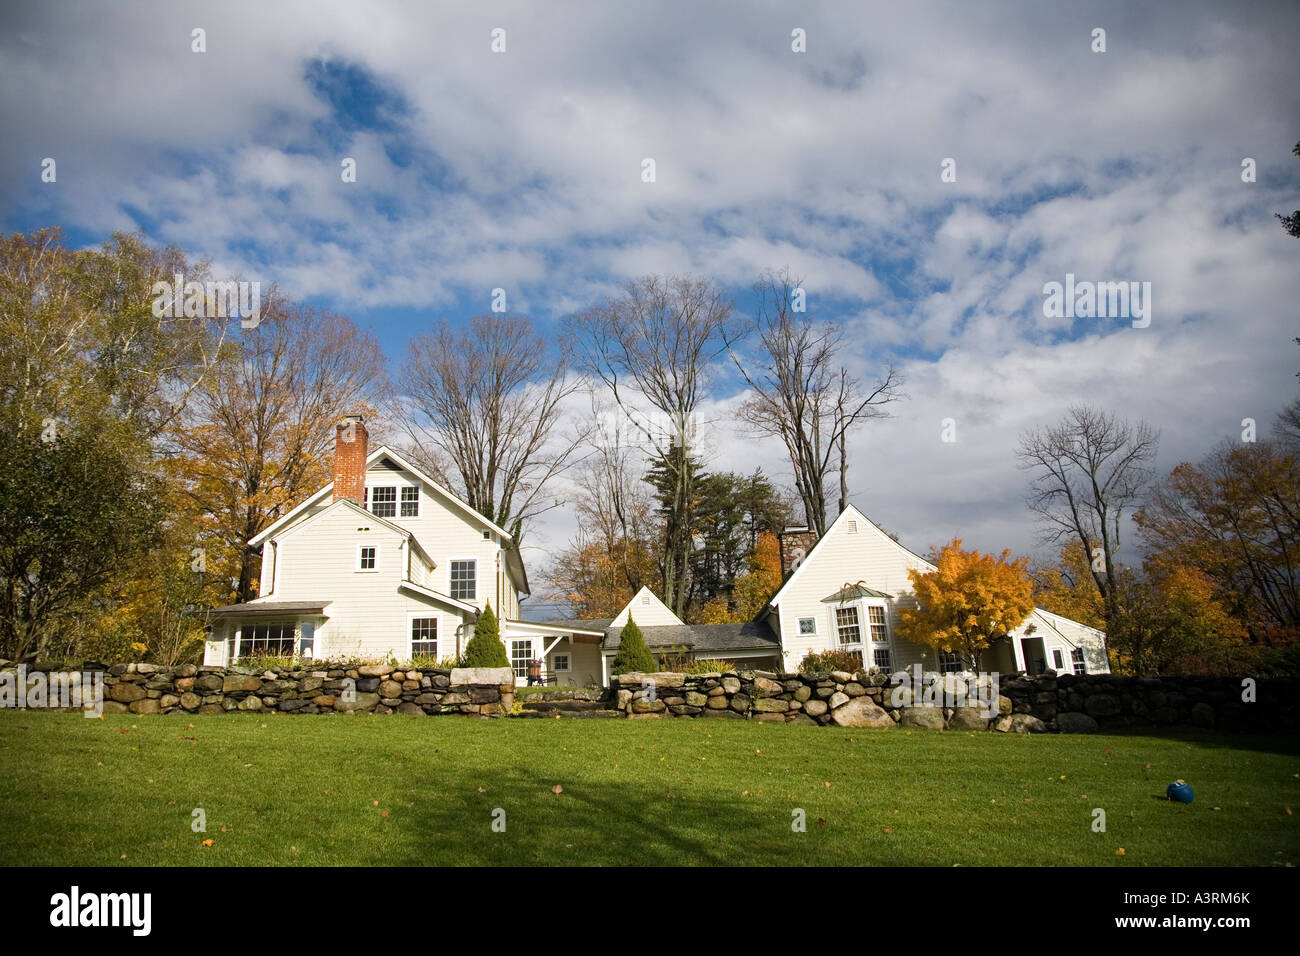 Typical New England wooden house in Wilton Connecticut USA Stock Photo